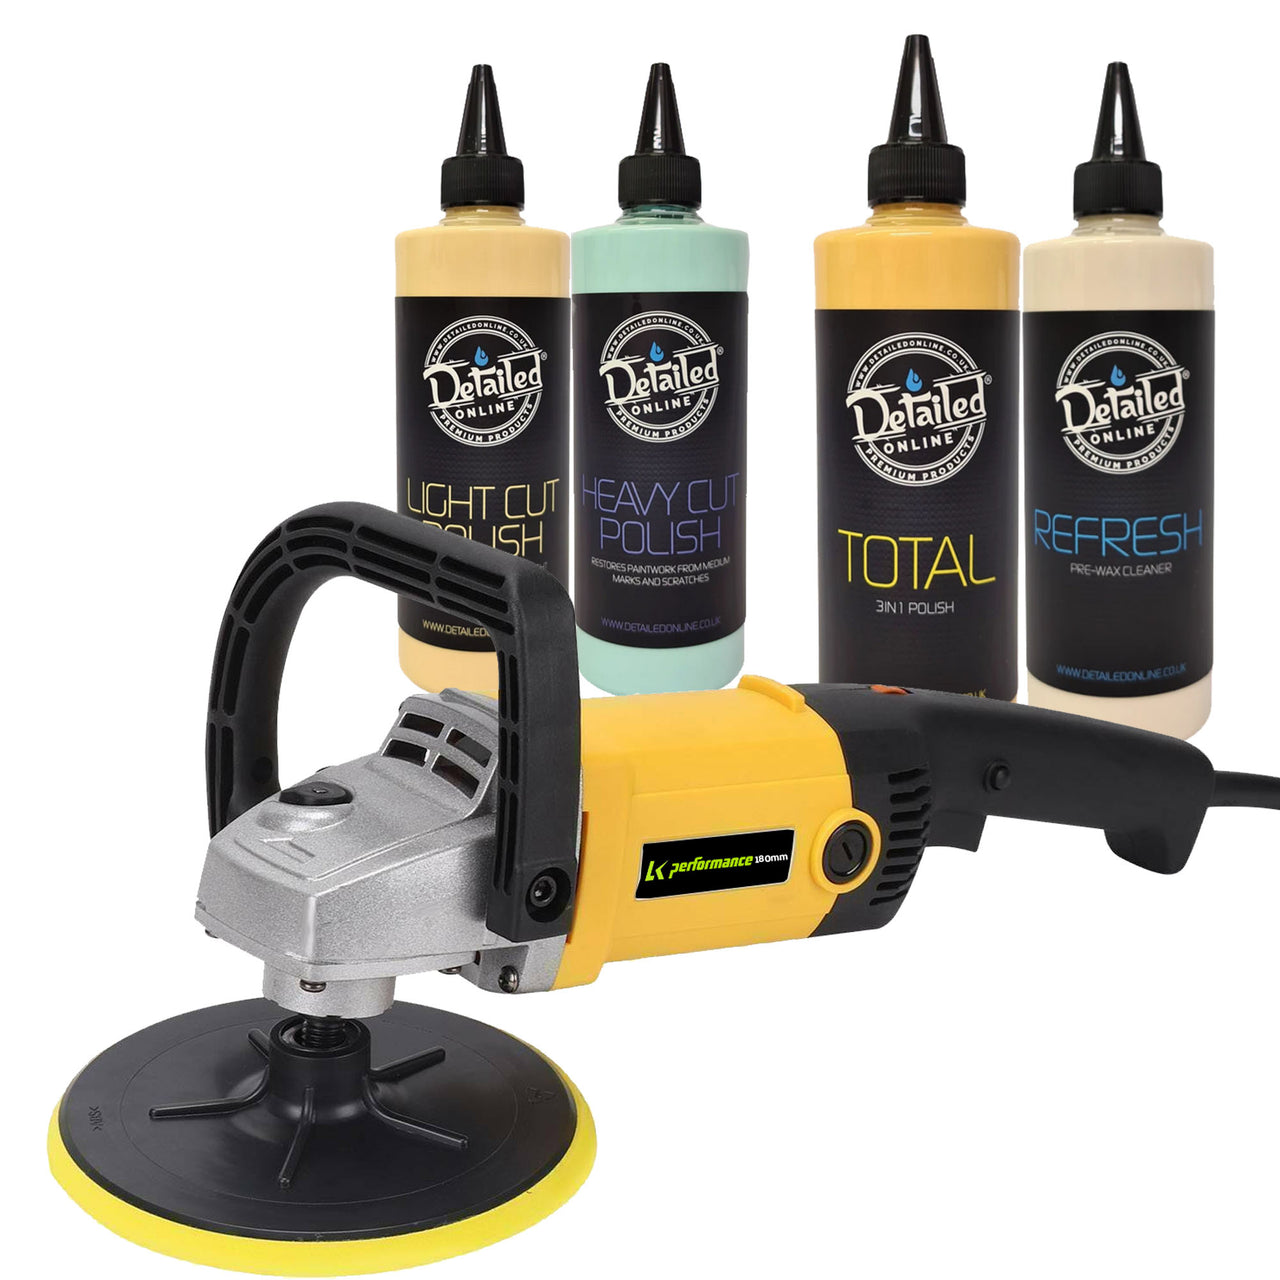 FULL LK Performance Car Polisher Kit With Compound, Polish & Pre Wax Cleaner